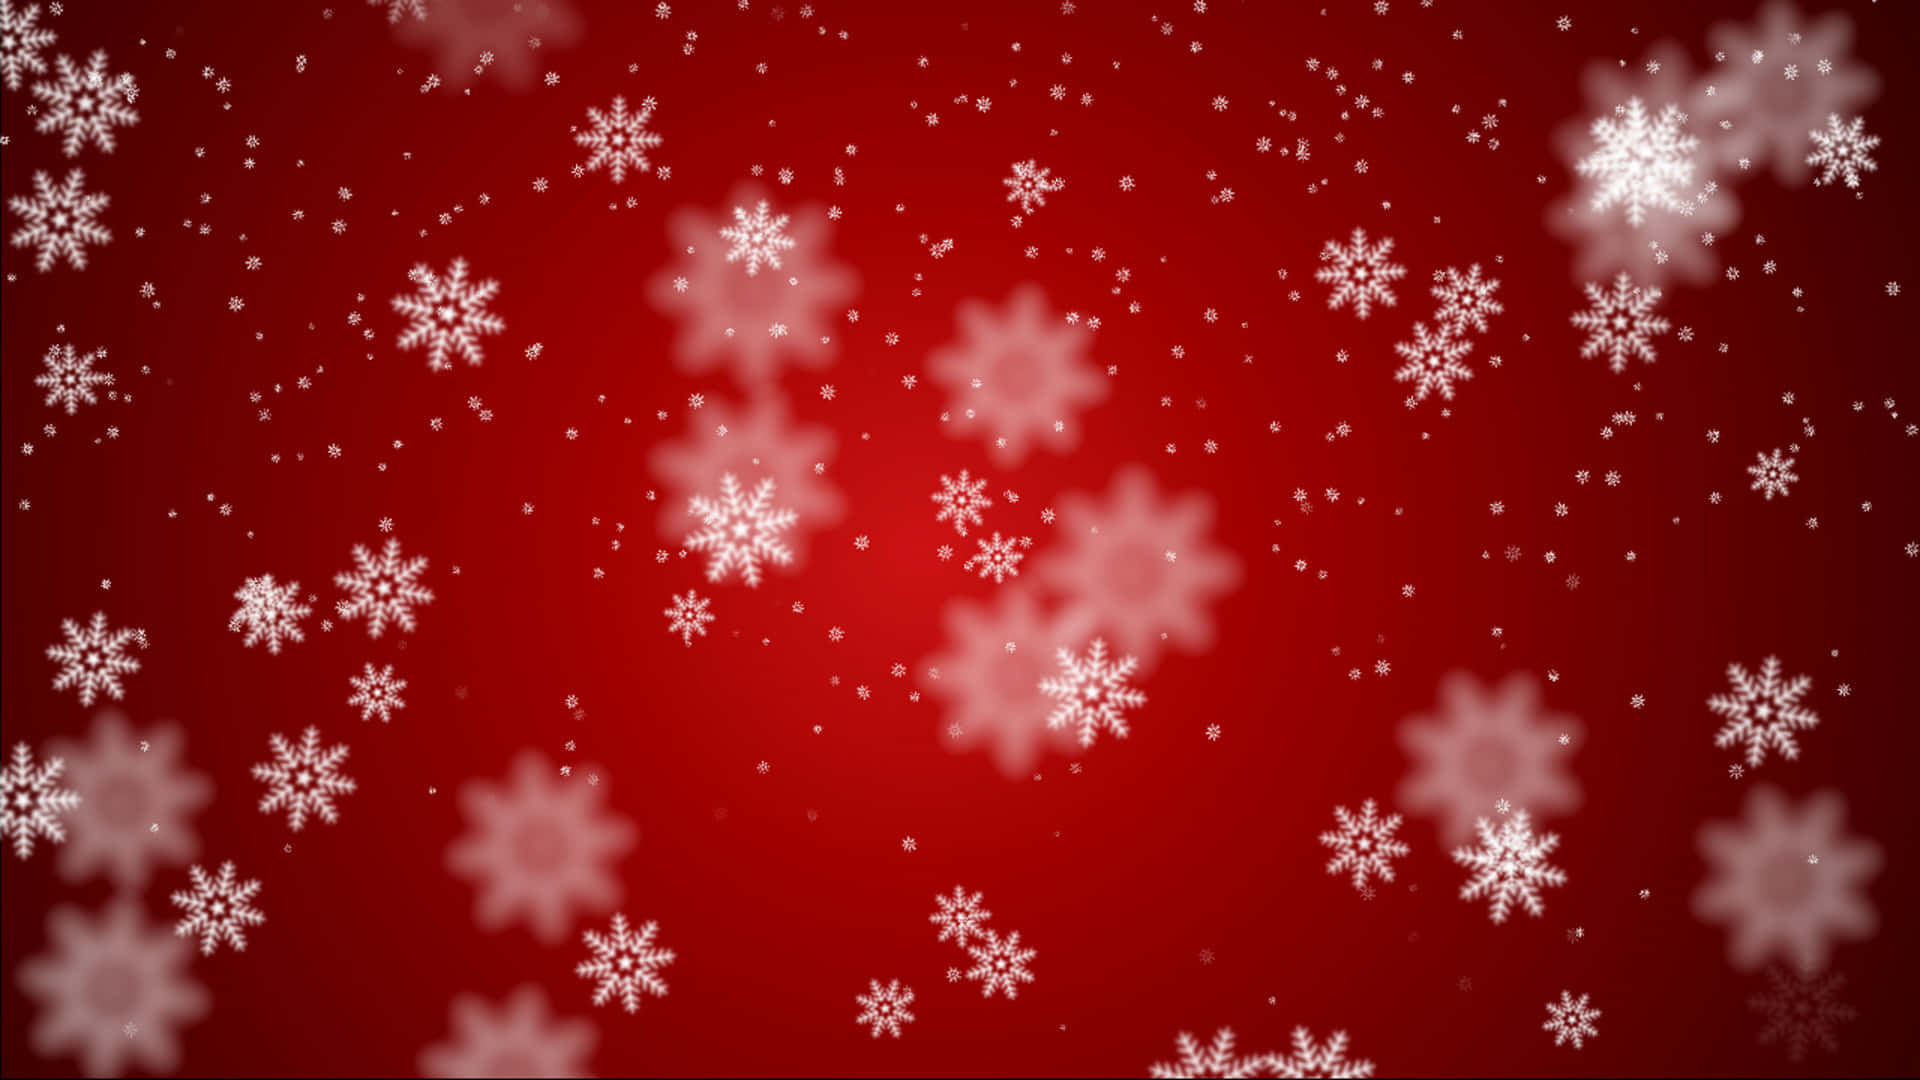 Celebrate the holidays with a beautiful, red Christmas background